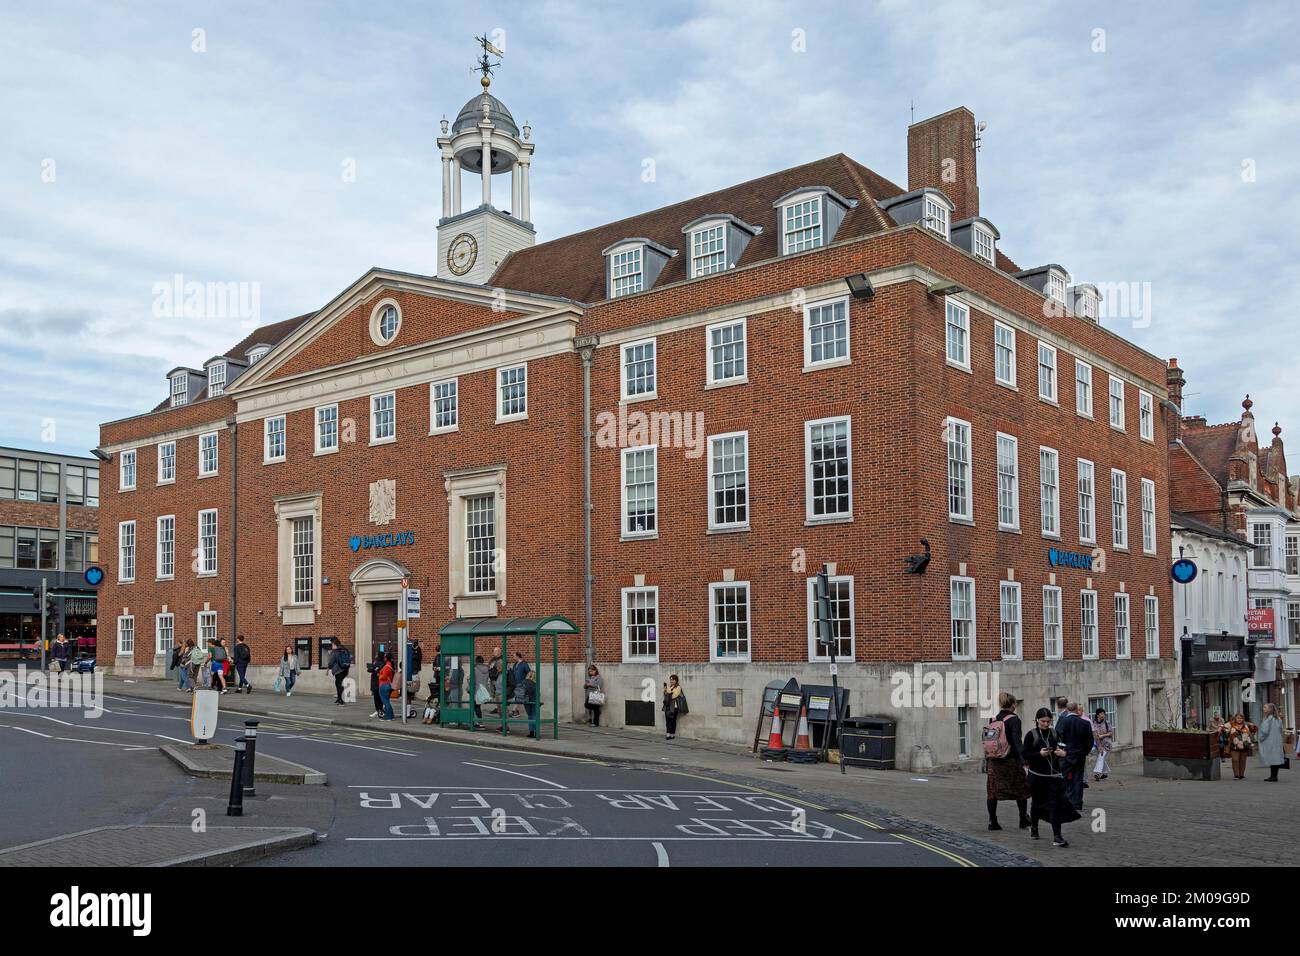 Barclays Bank Building, Winchester, Hampshire, Angleterre, Royaume-Uni, Europe Banque D'Images